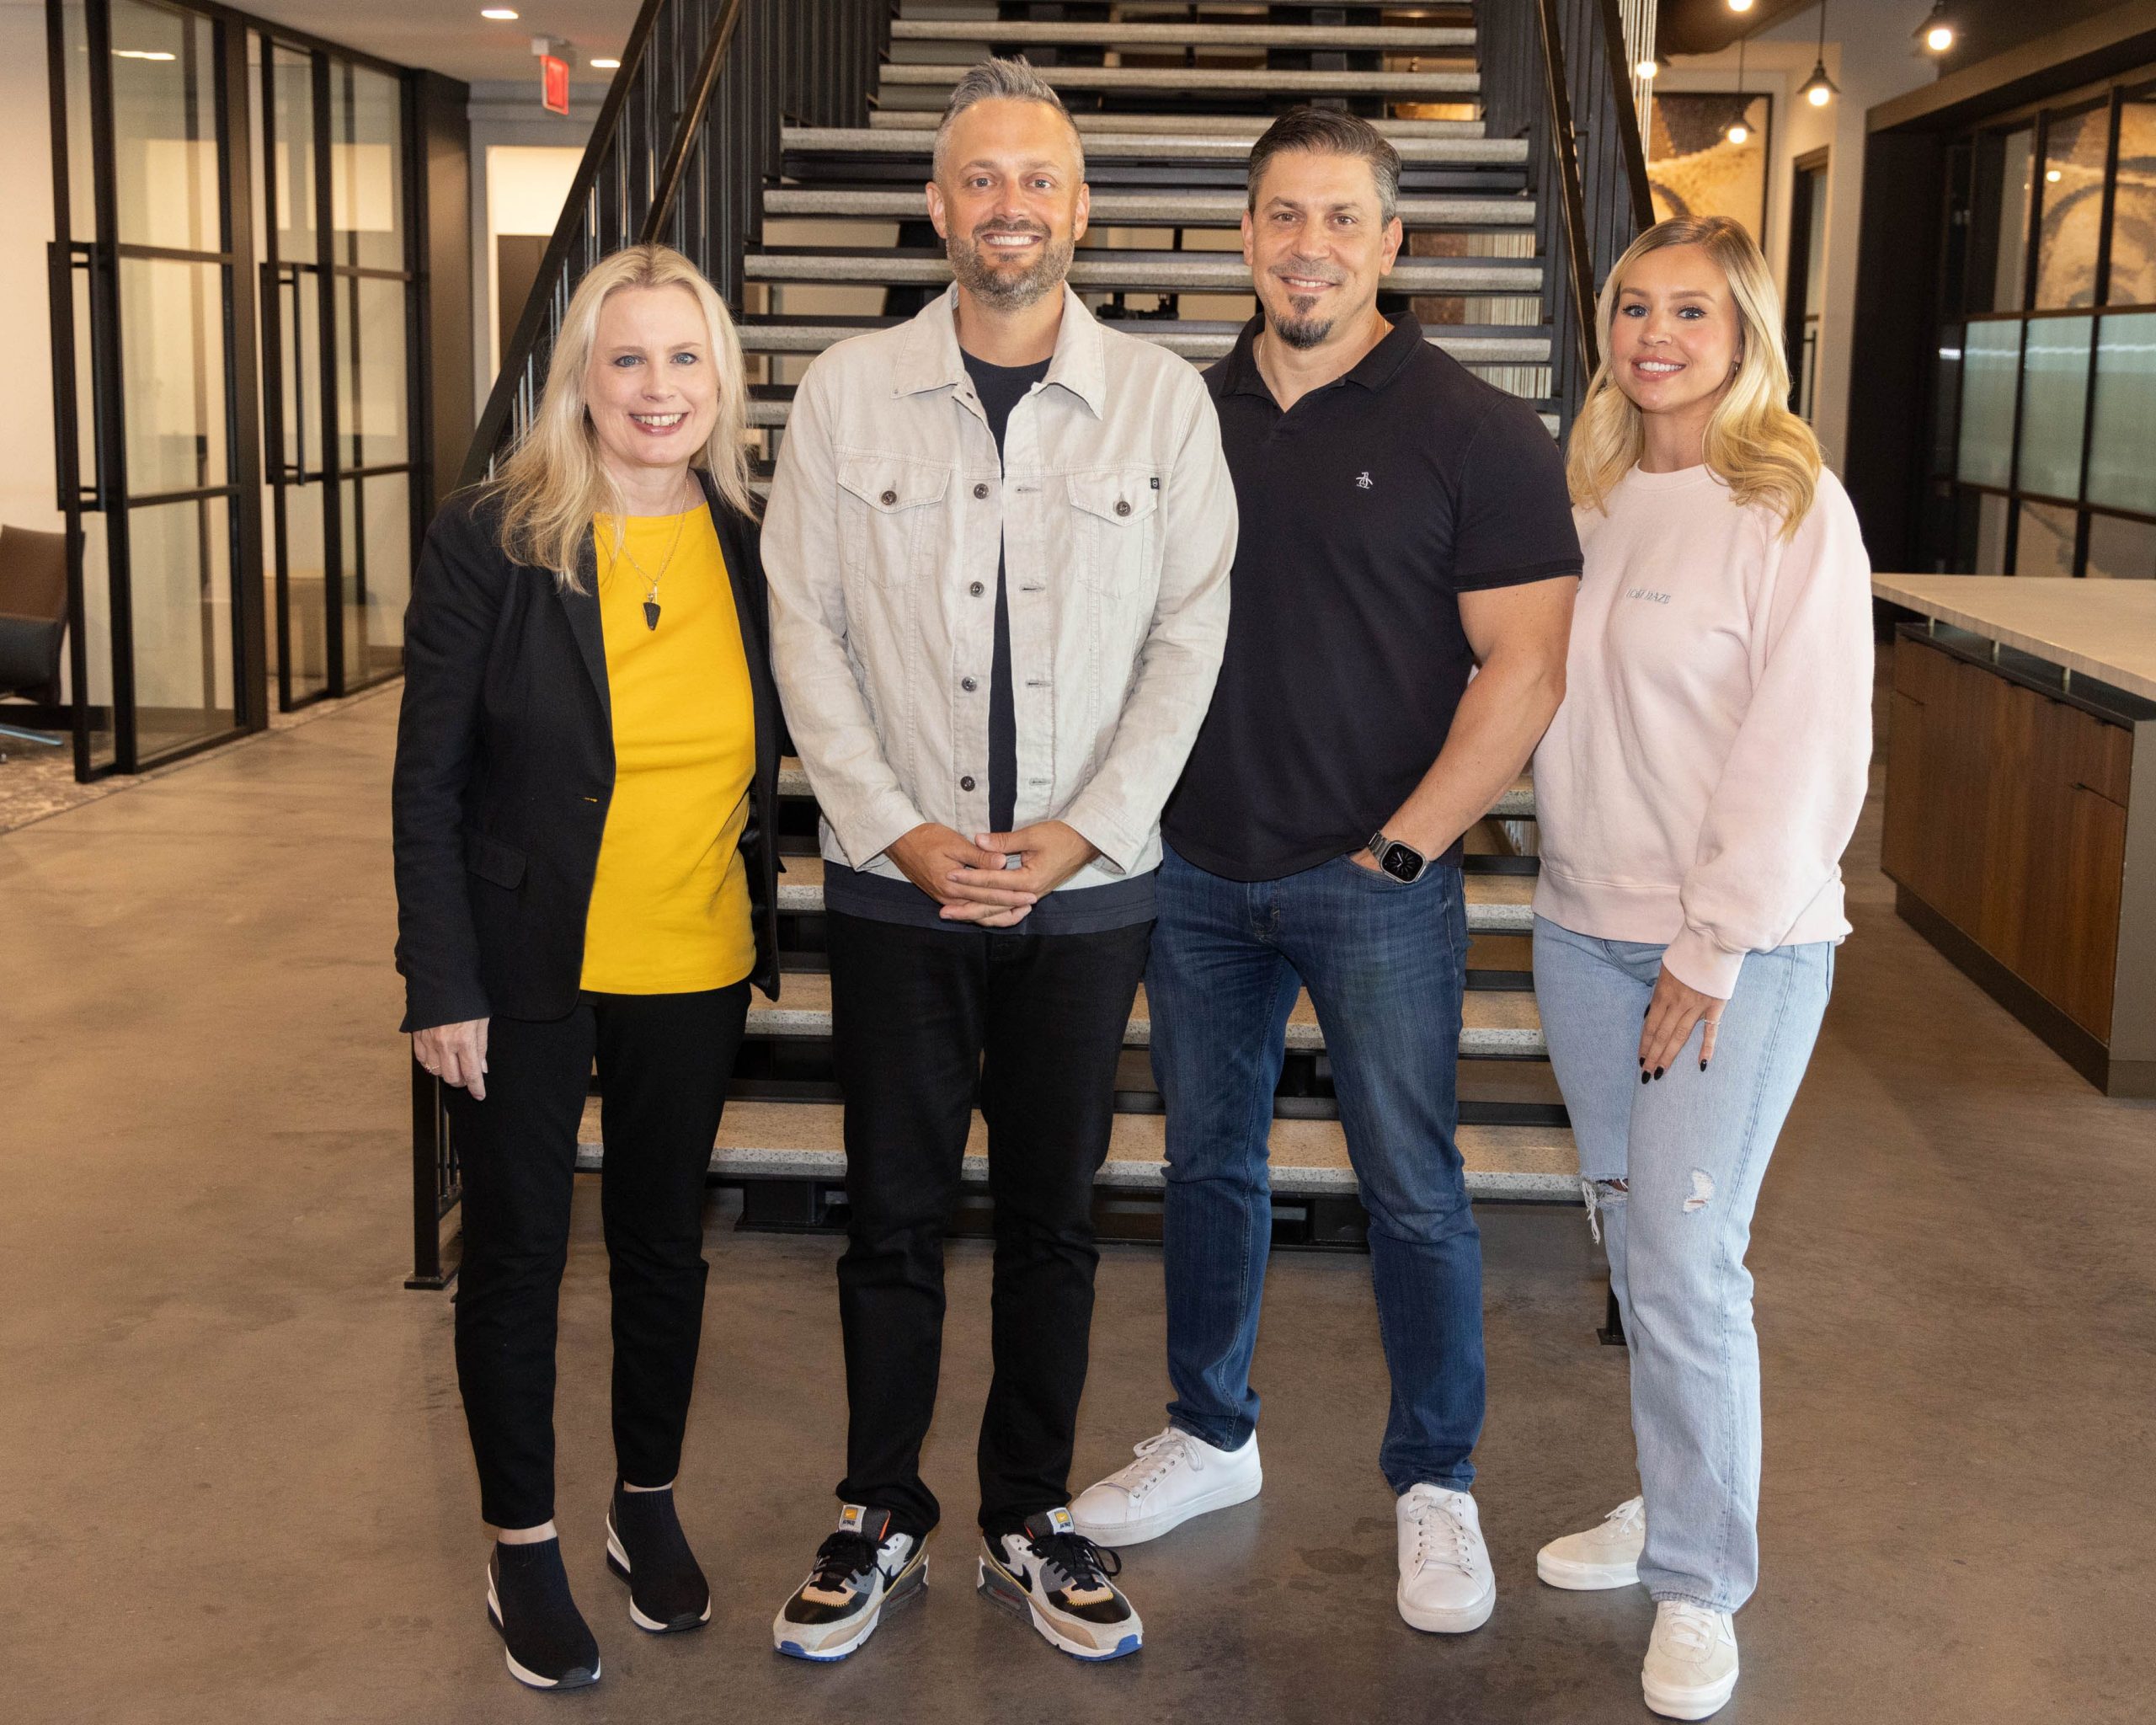 Universal Music Group Nashville Launches New Label Capitol Comedy Nashville with Comedian Nate Bargatze